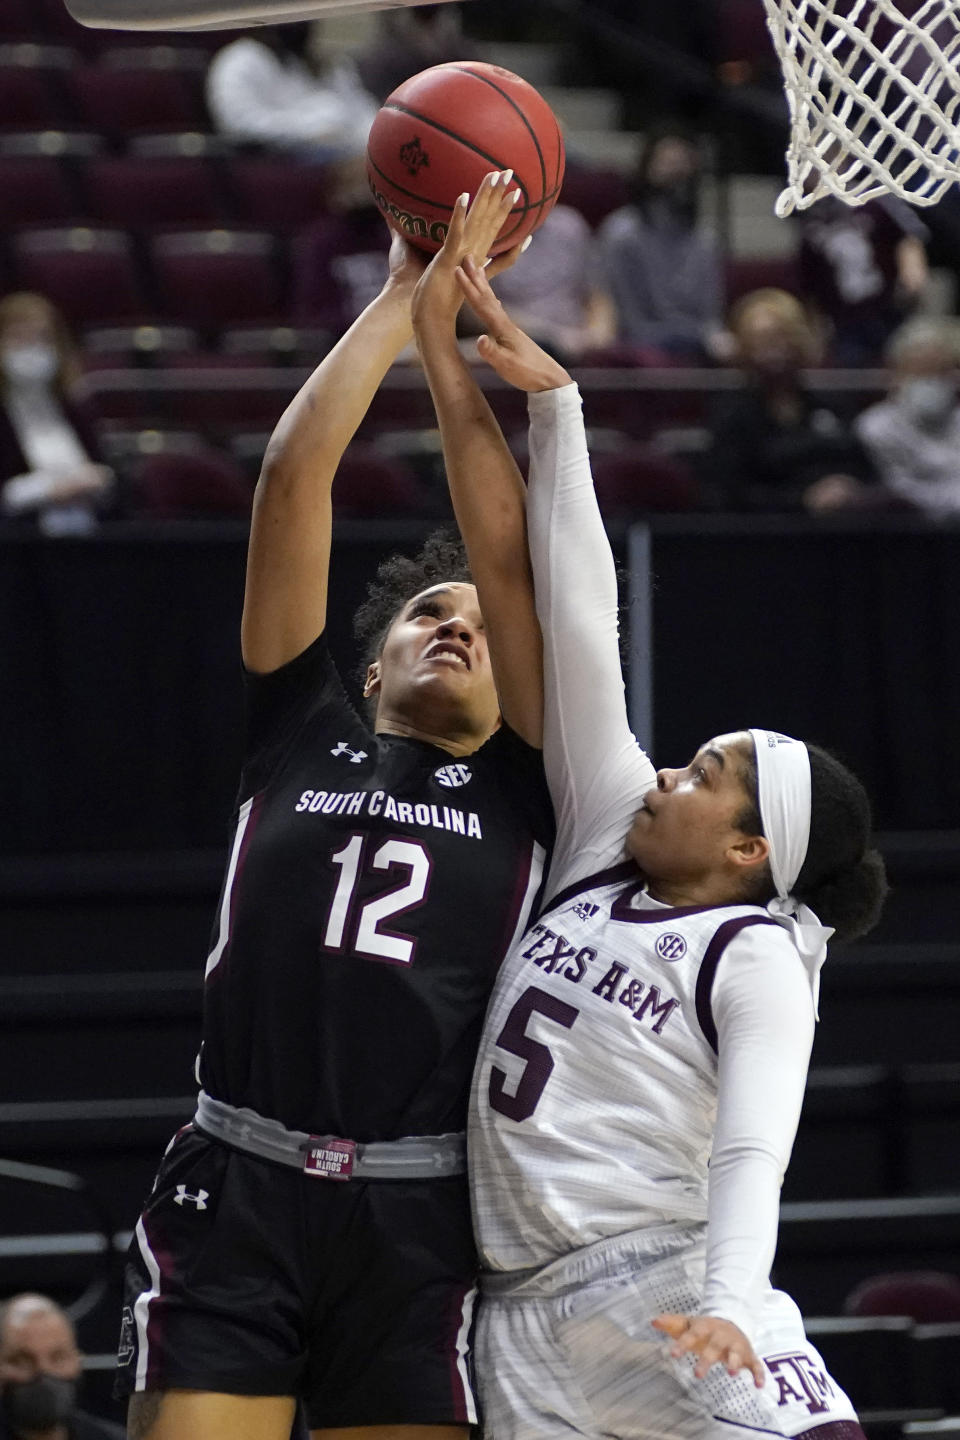 South Carolina guard Brea Beal (12) shoots over Texas A&M guard Jordan Nixon (5) during the first half of an NCAA college basketball game Sunday, Feb. 28, 2021, in College Station, Texas. (AP Photo/Sam Craft)